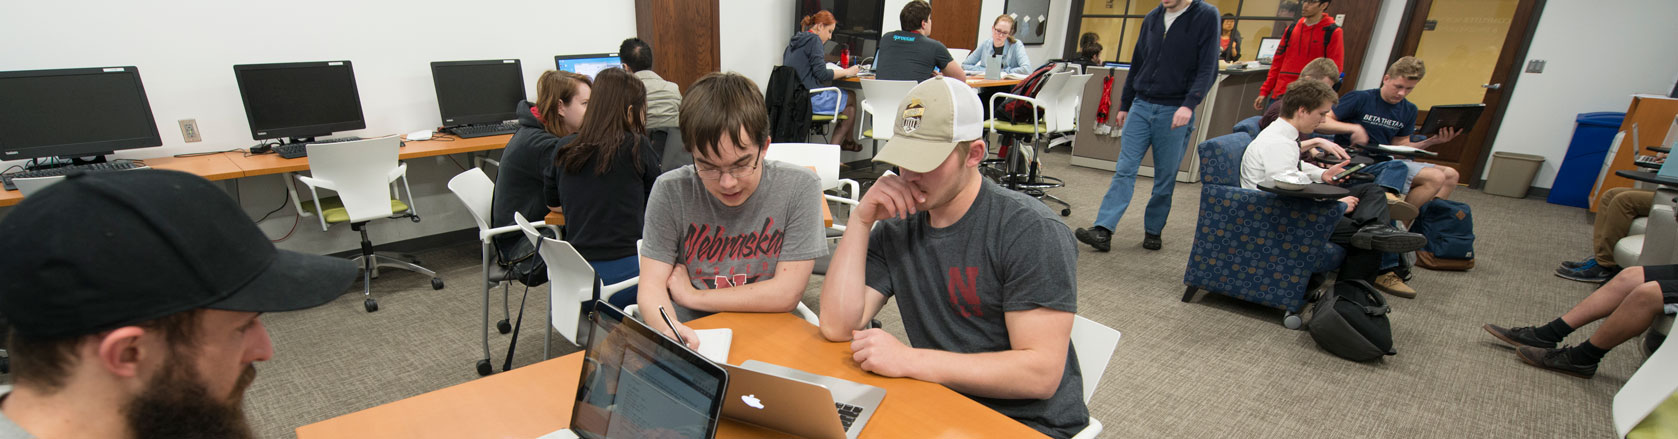 Students in the Student Resource Center in Avery Hall.